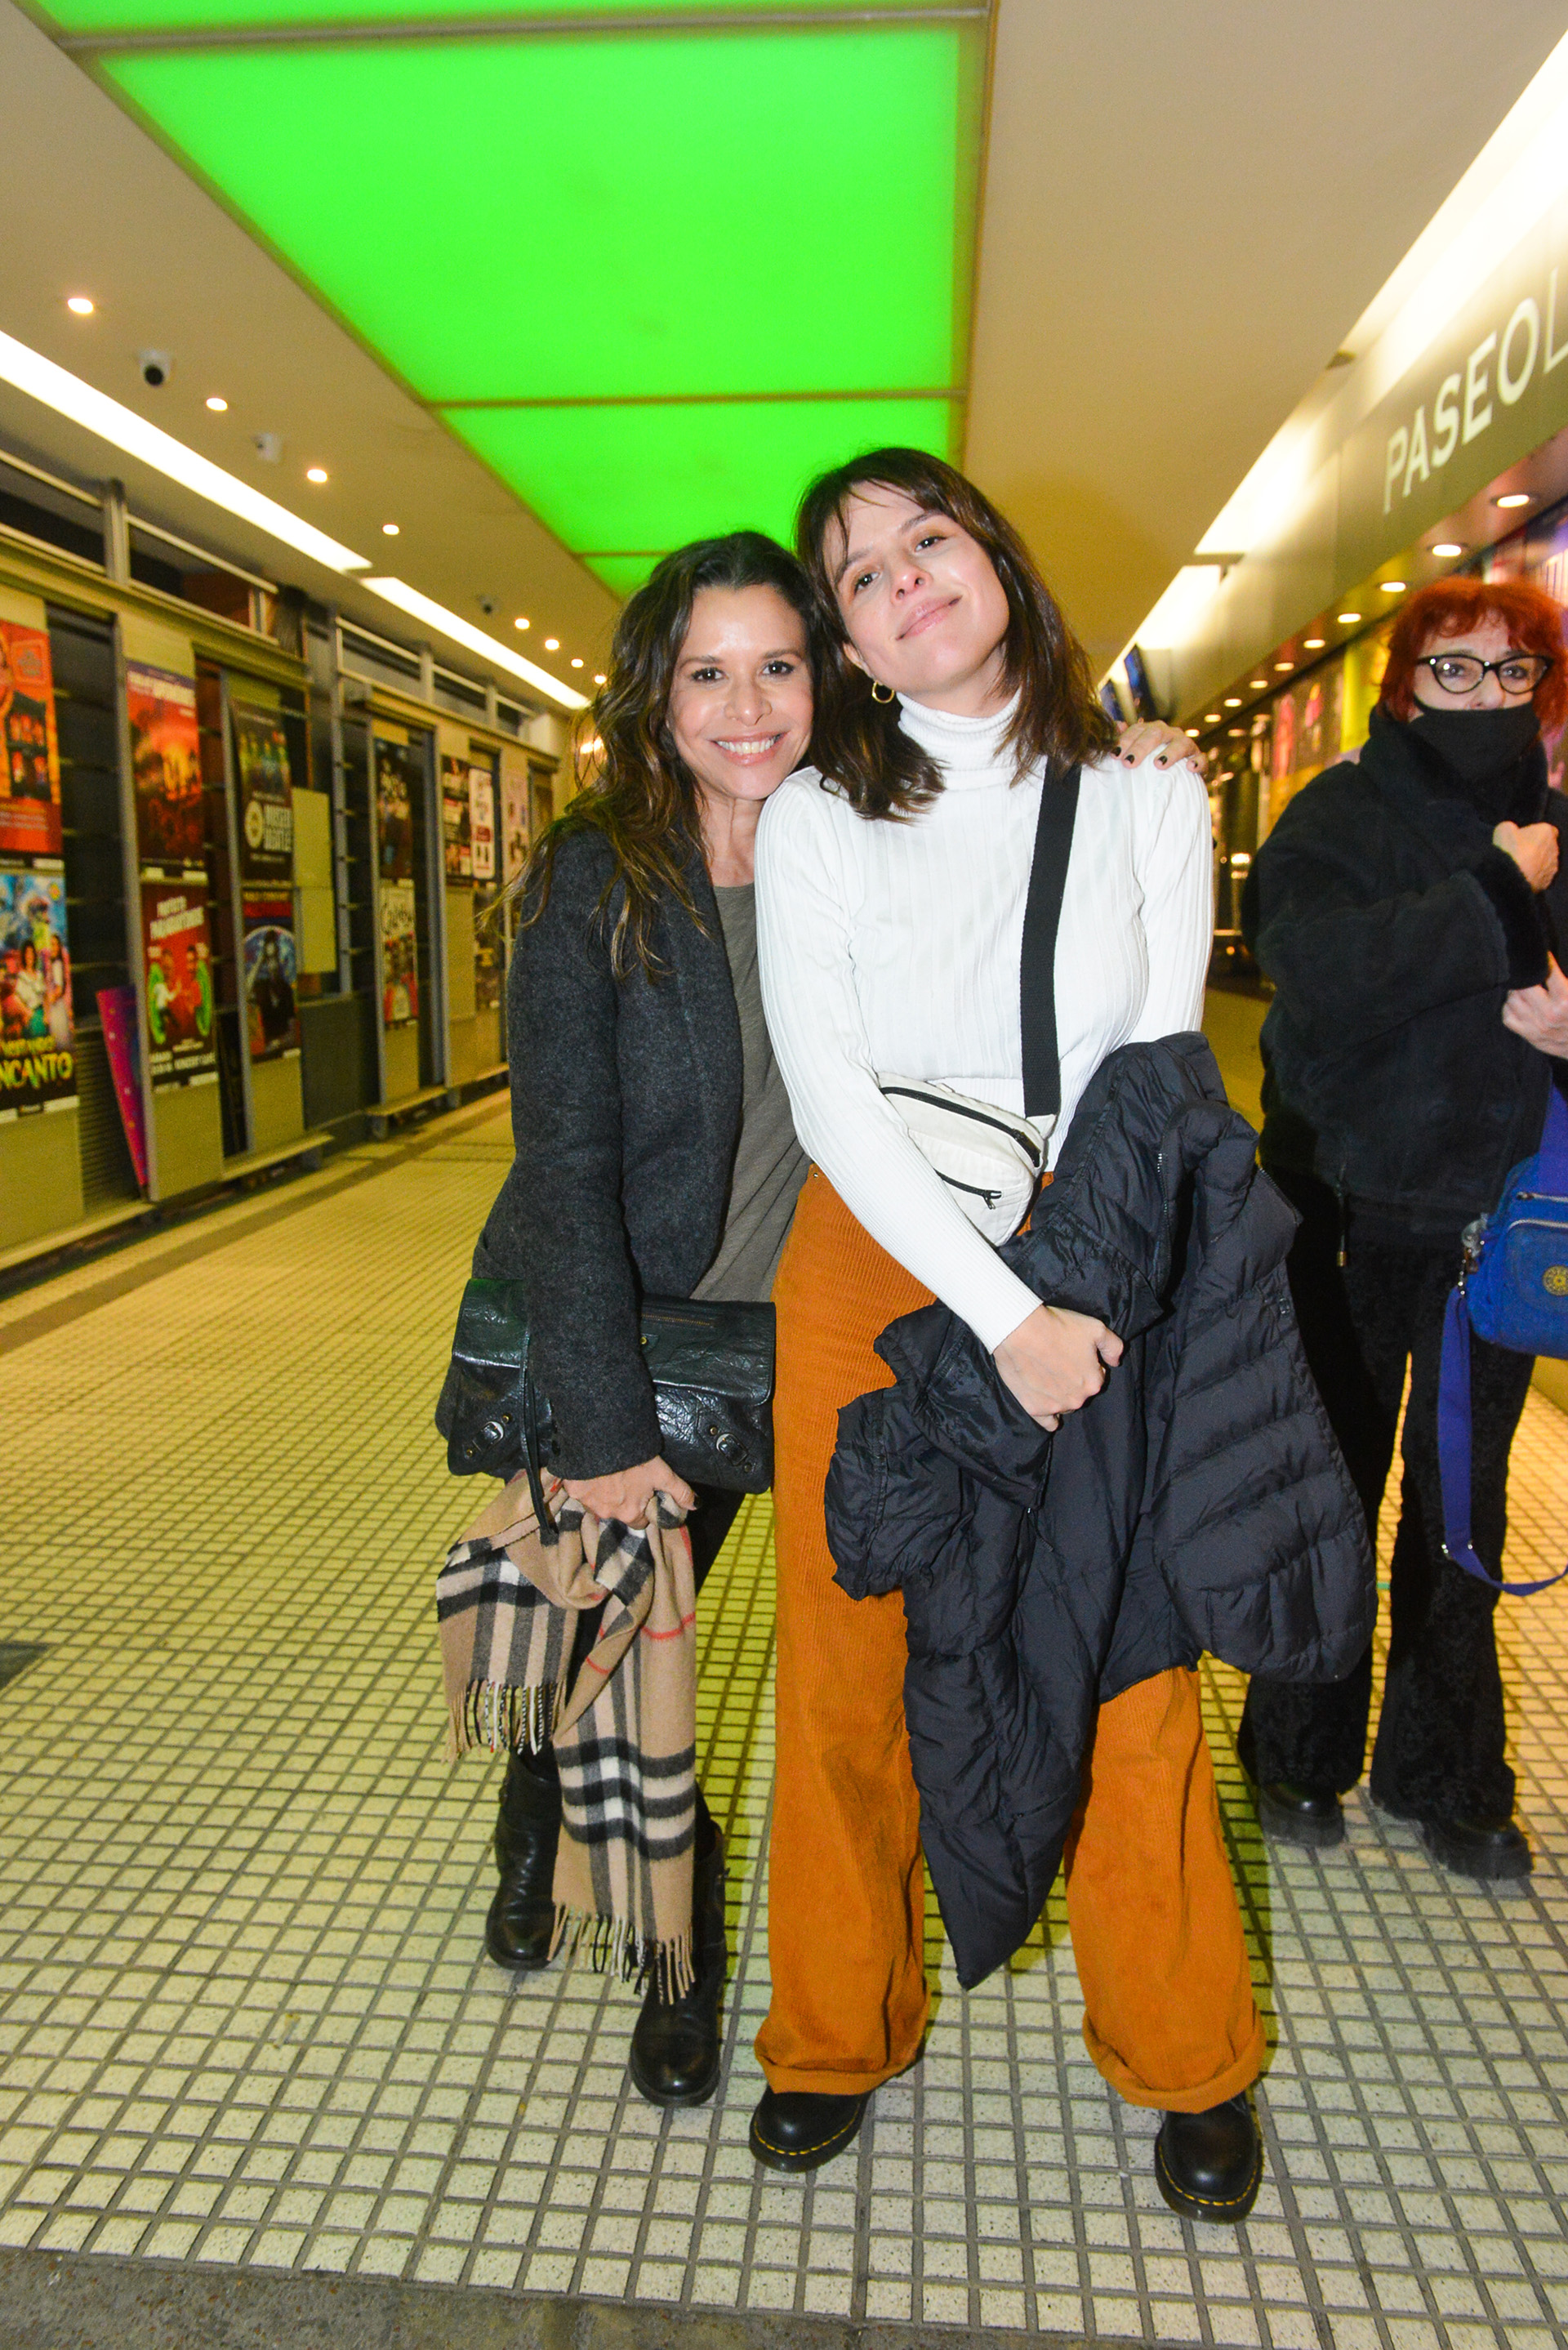 Sisters of Juliet and Rosario Ortega, present at the premiere of "don't go with or without love"